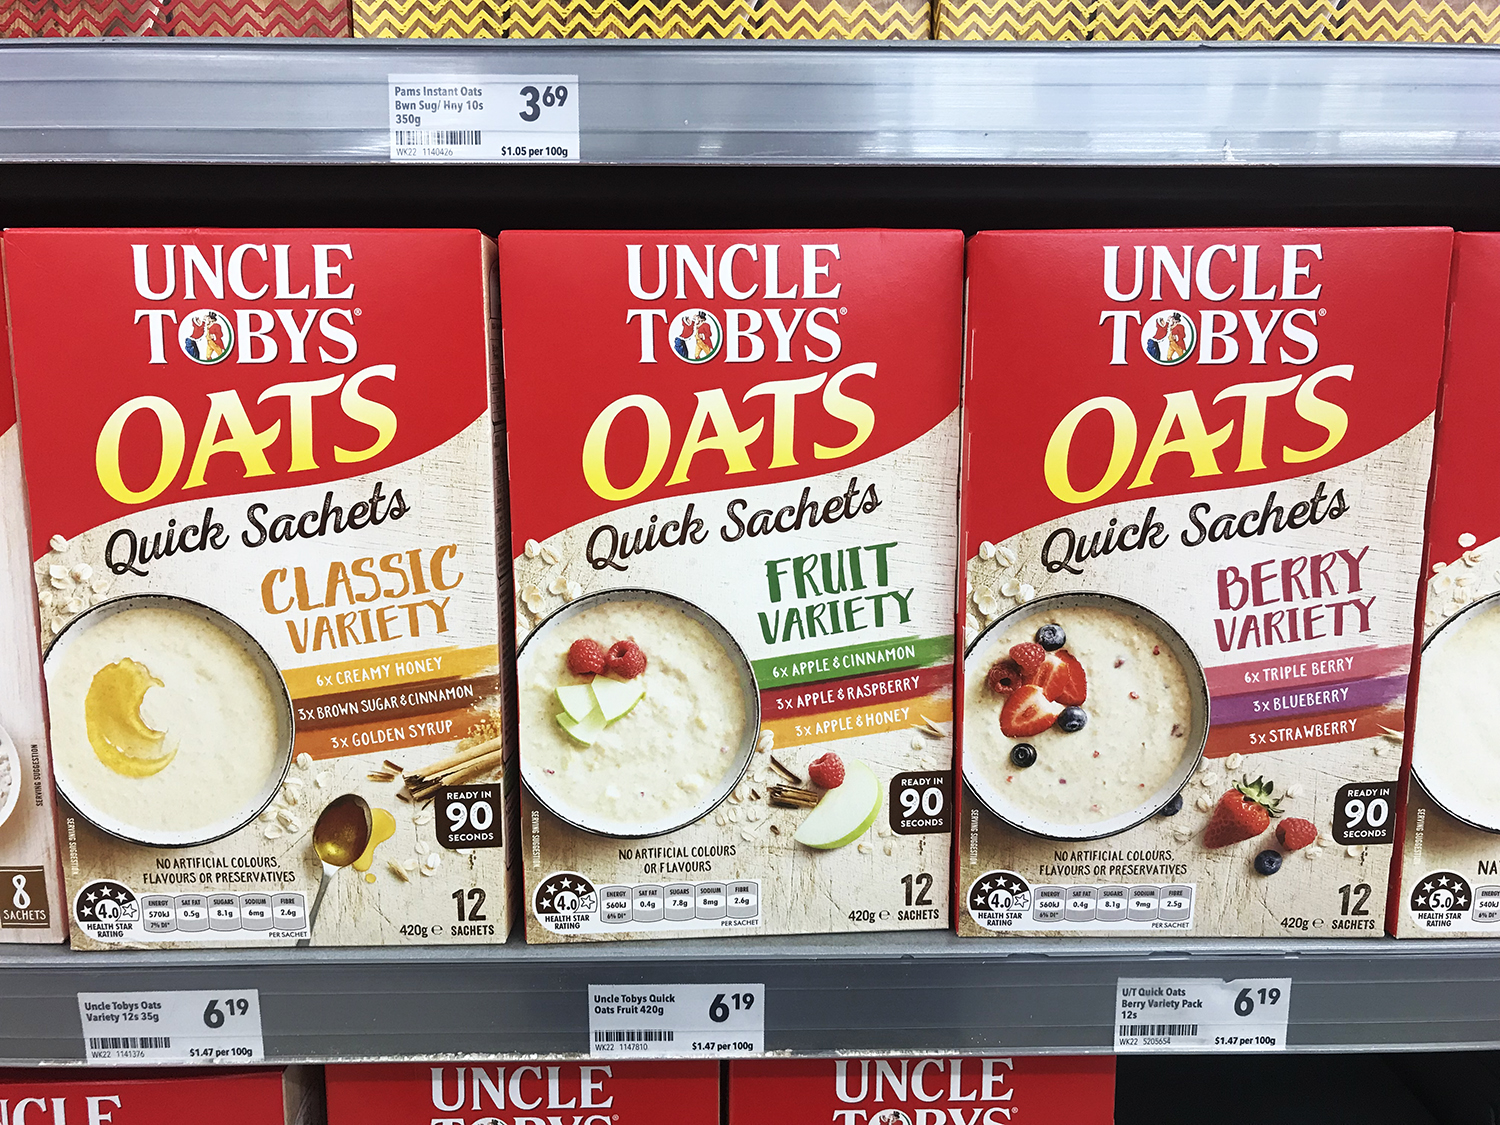  It used to be boring, bland oatmeal- not anymore. 